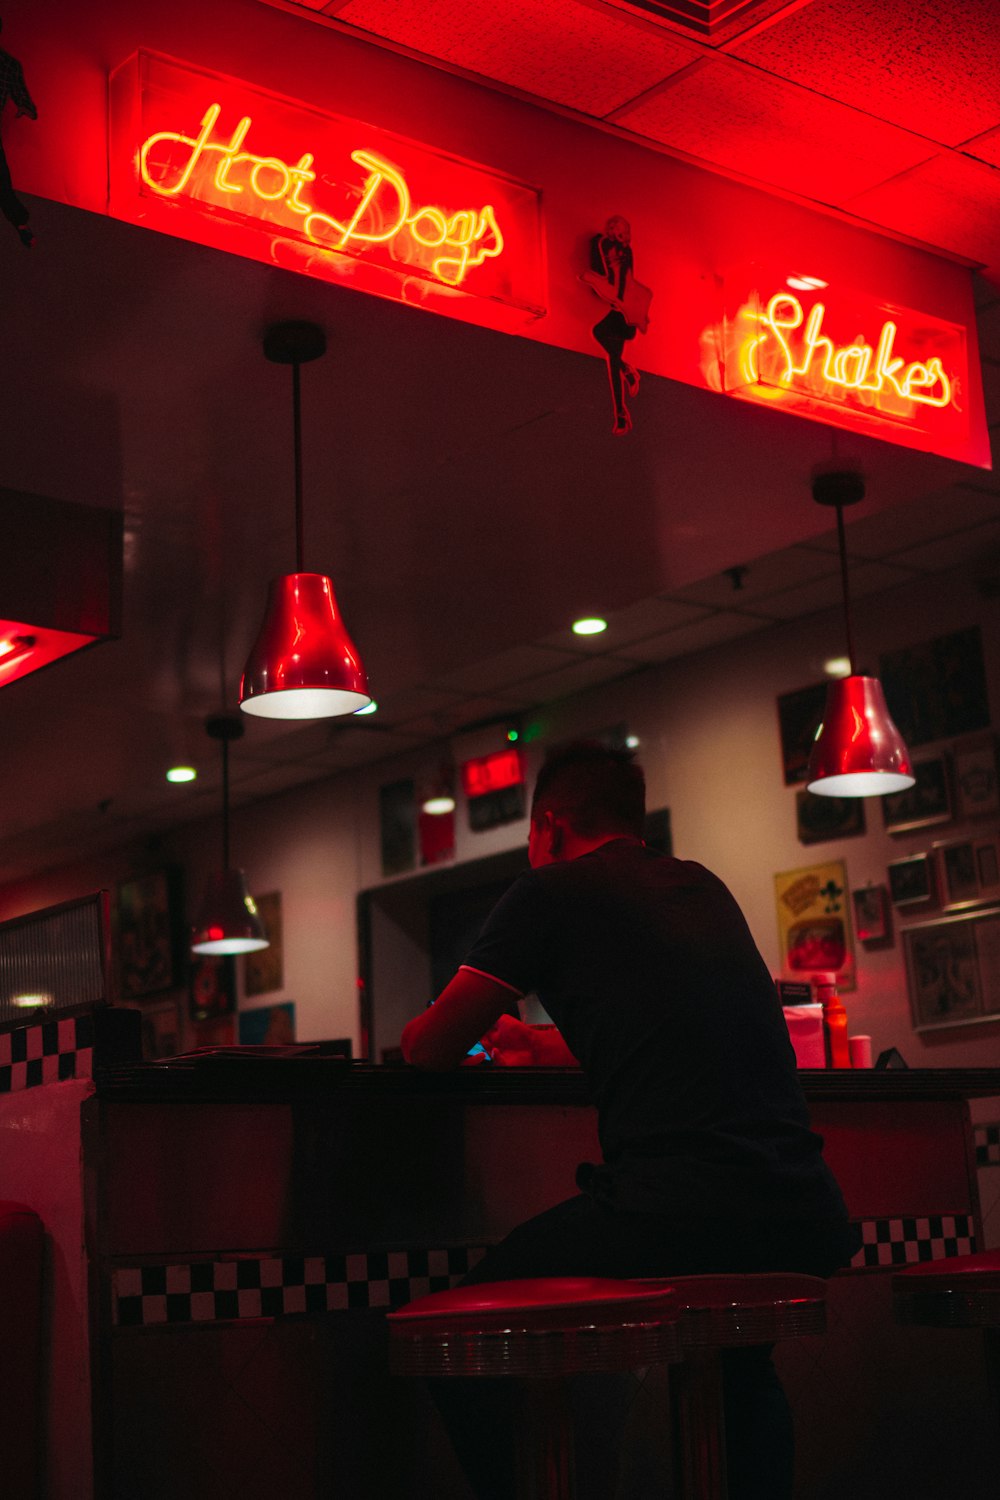 man sitting under hot dogs and shakes signages